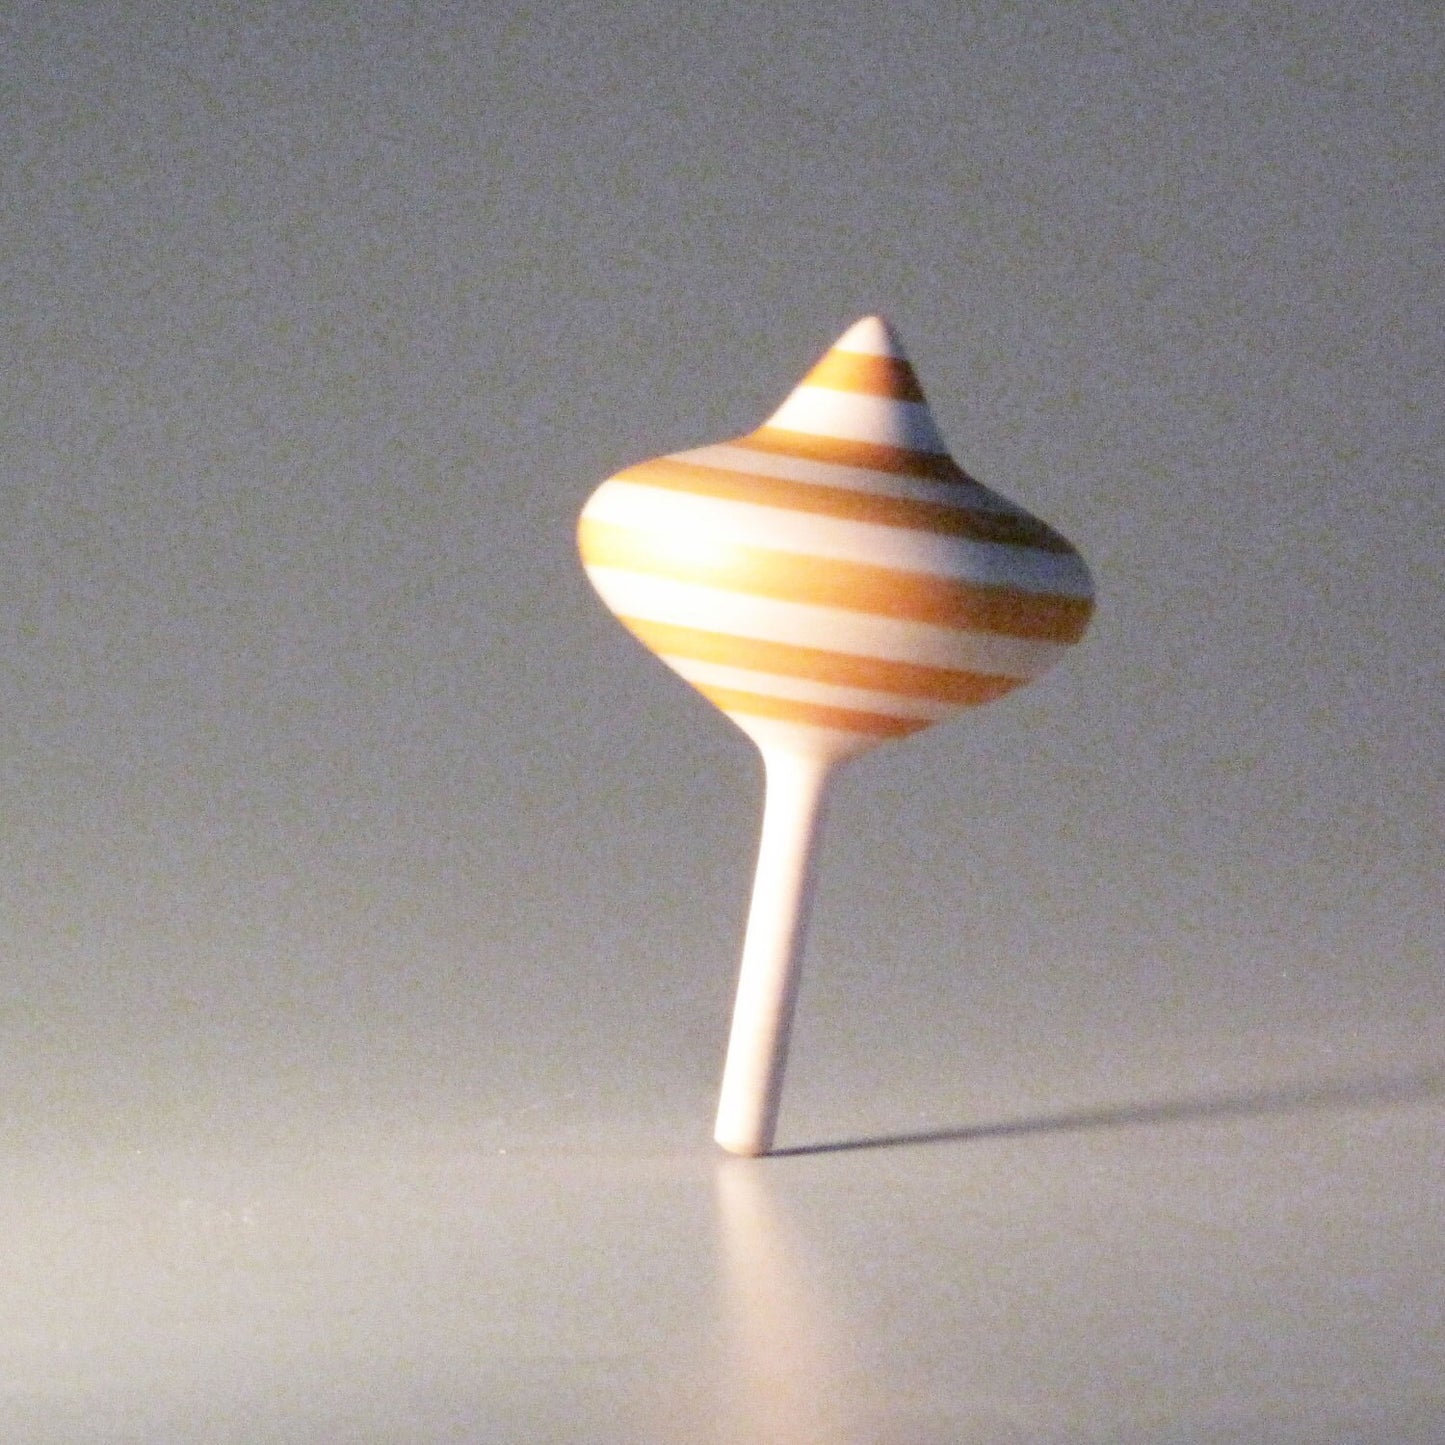 Onion-shaped spinning top with orange stripes